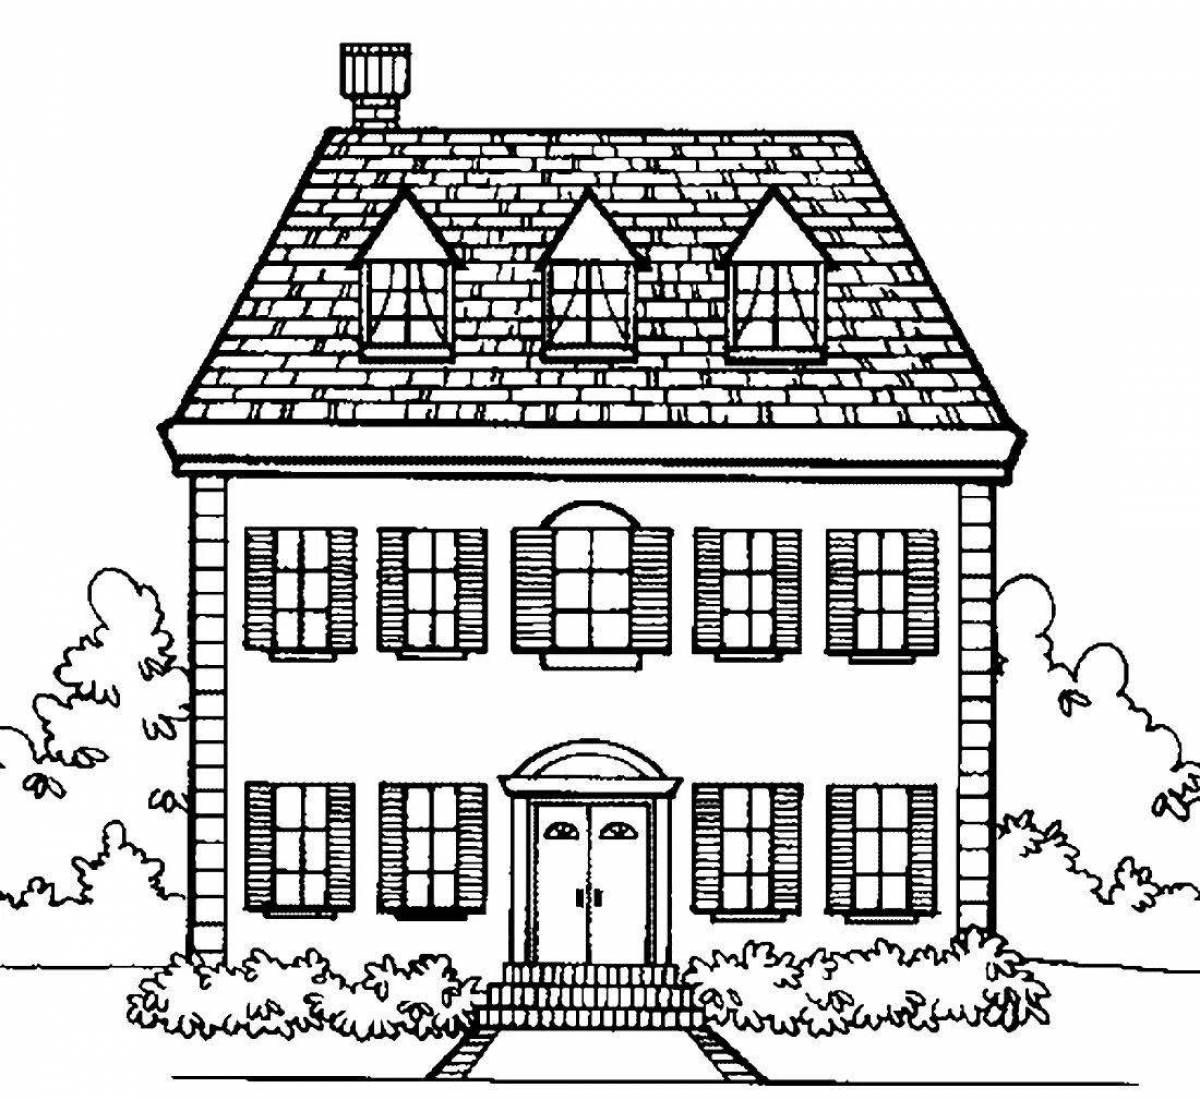 Decorated drawing of a house